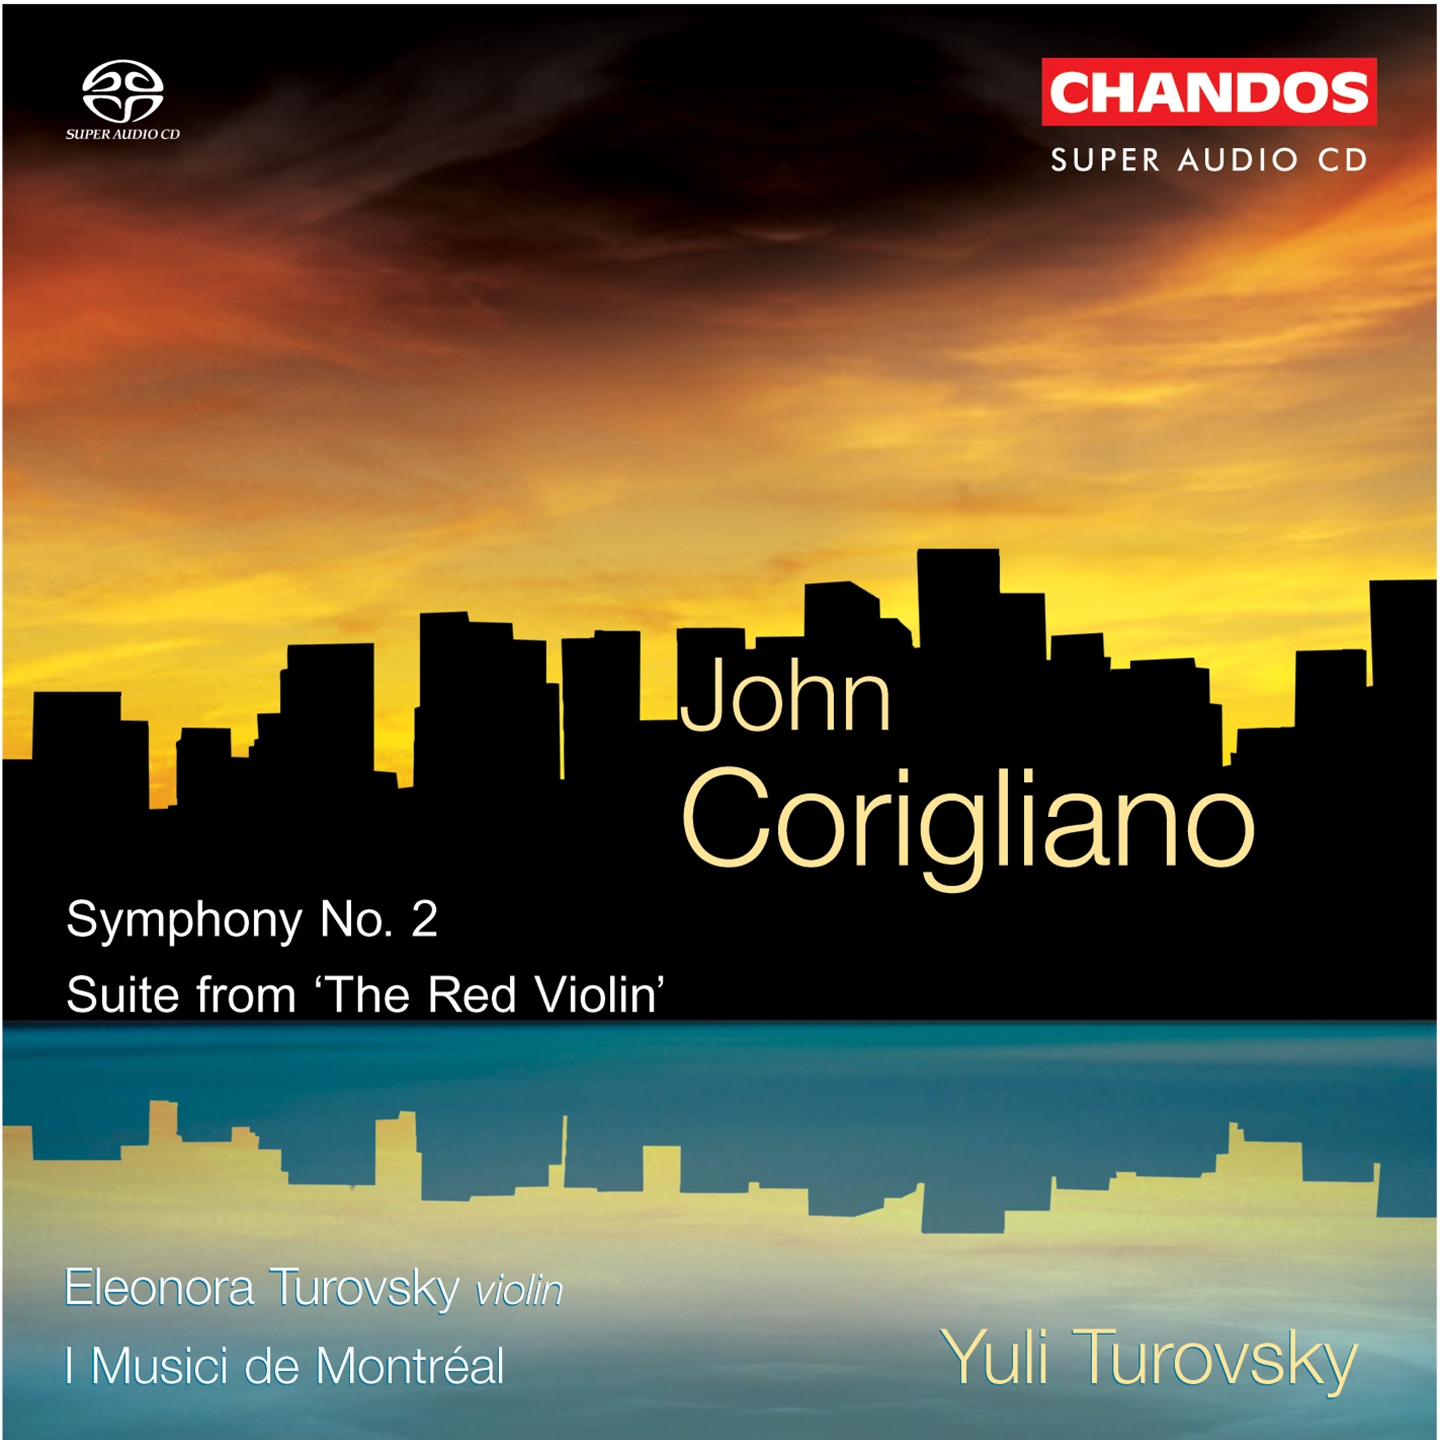 CORIGLIANO: SYMPHONY NO 2 / SUITE FROM 'THE RED VIOLIN'